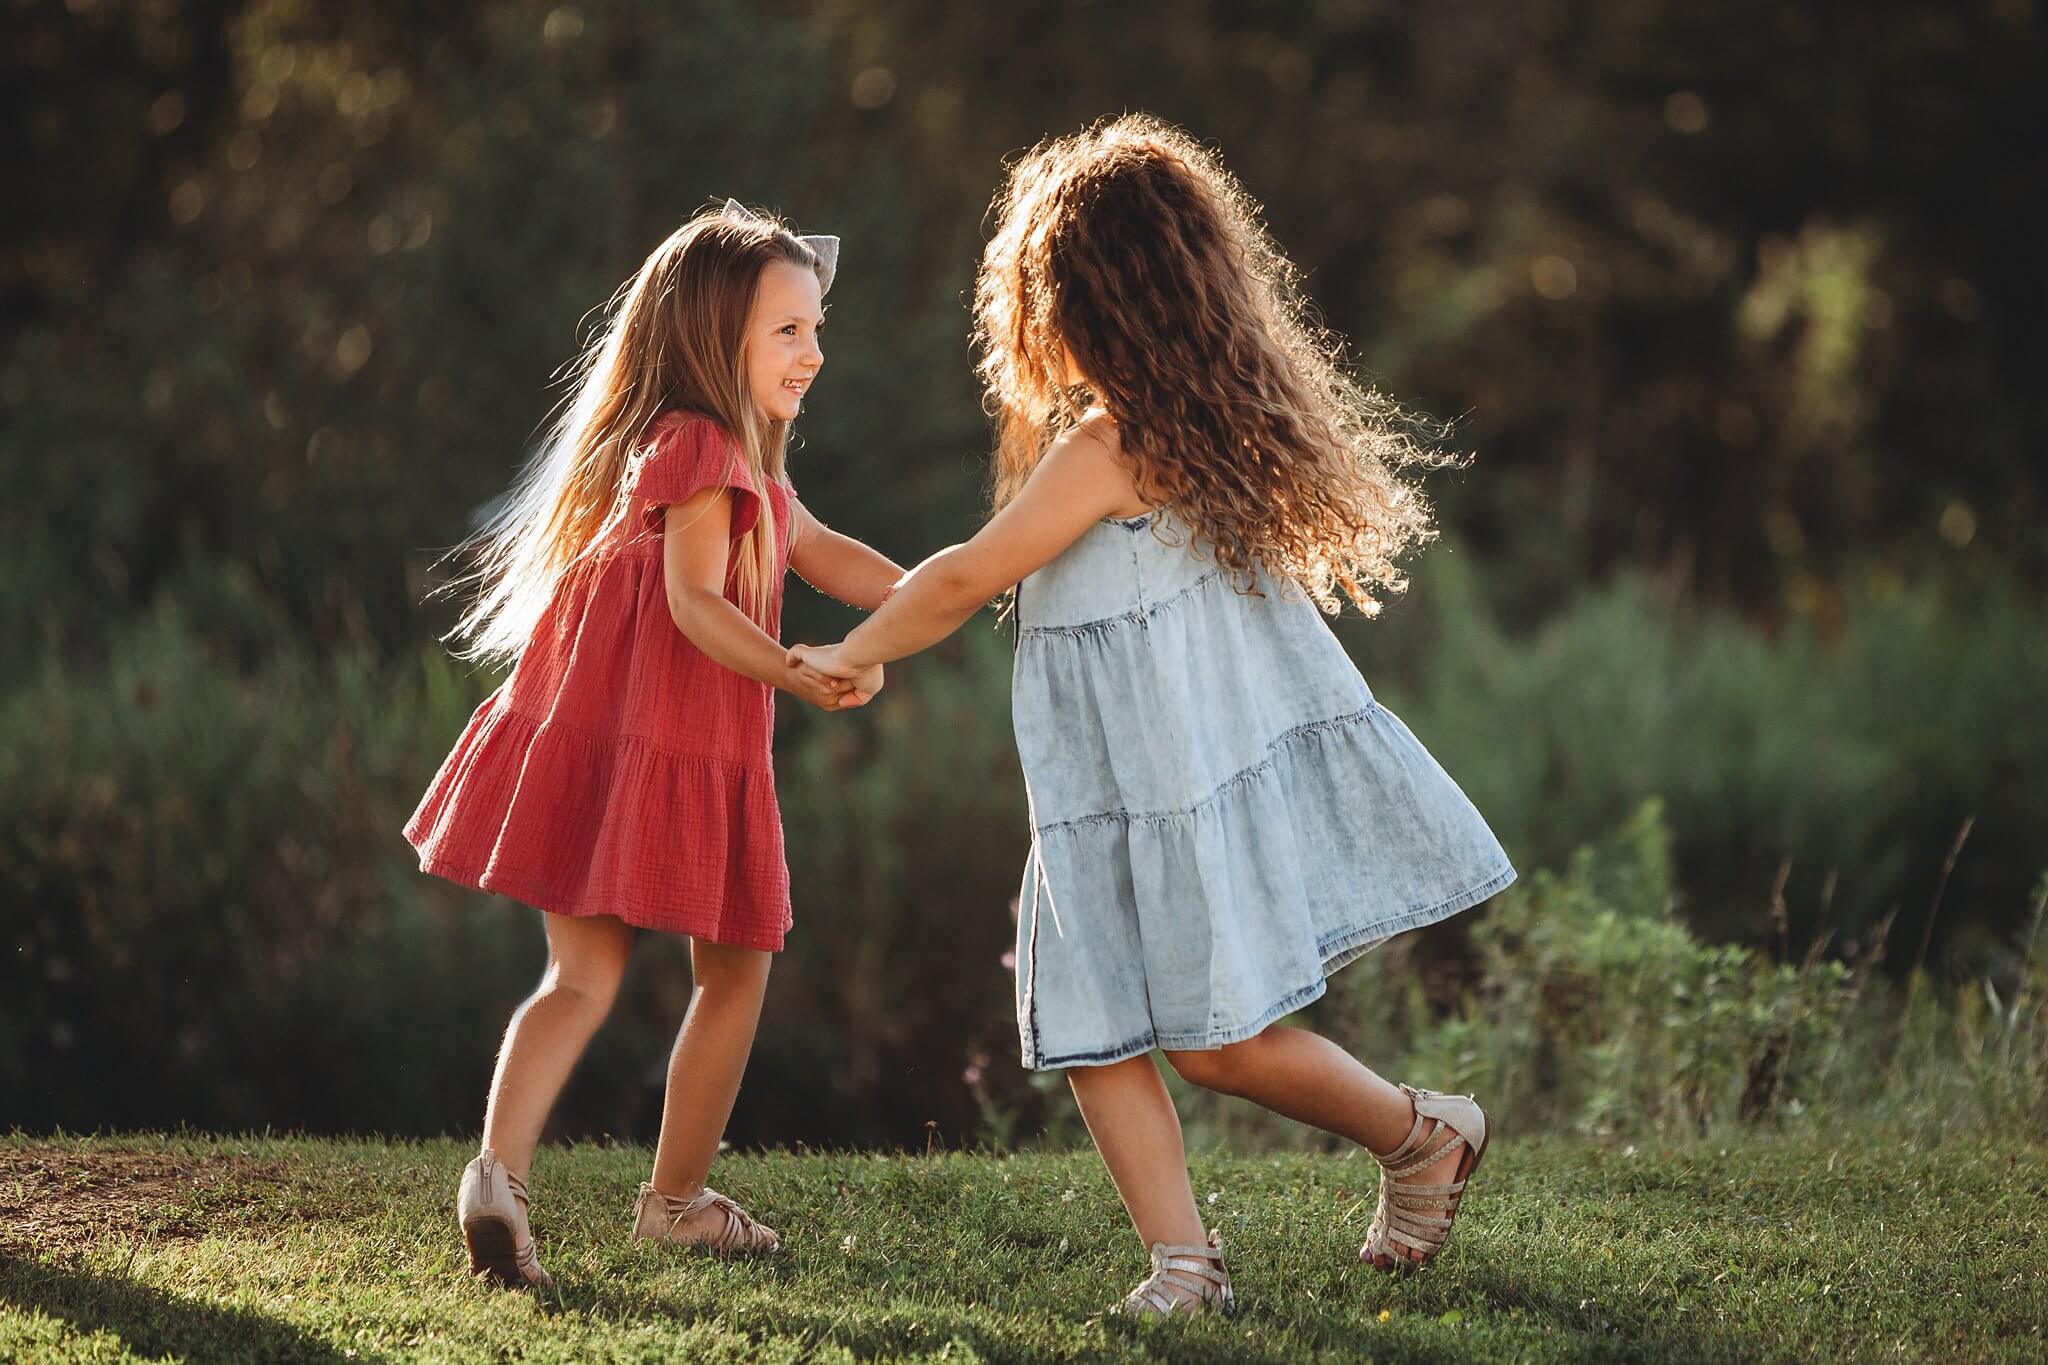 Young girls holding hands and dancing on the grass